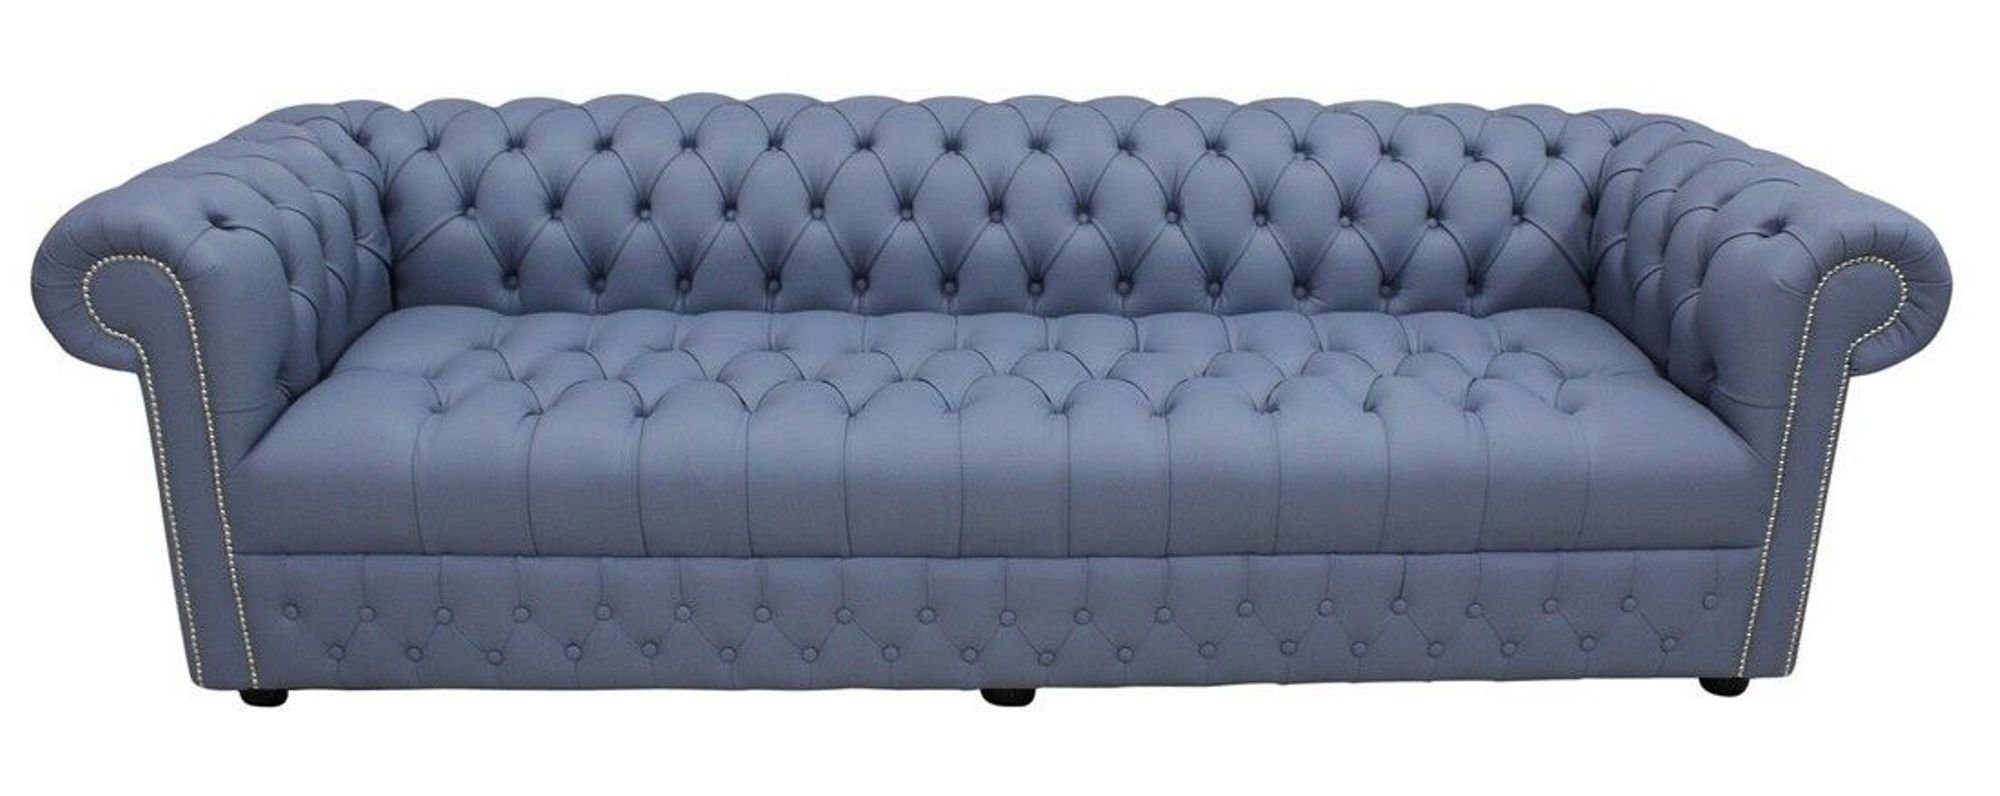 Europe Made Sofa 3 in Chesterfield JVmoebel XXL Polster Sitzer, Chesterfield-Sofa Big Sofas Couch 480cm